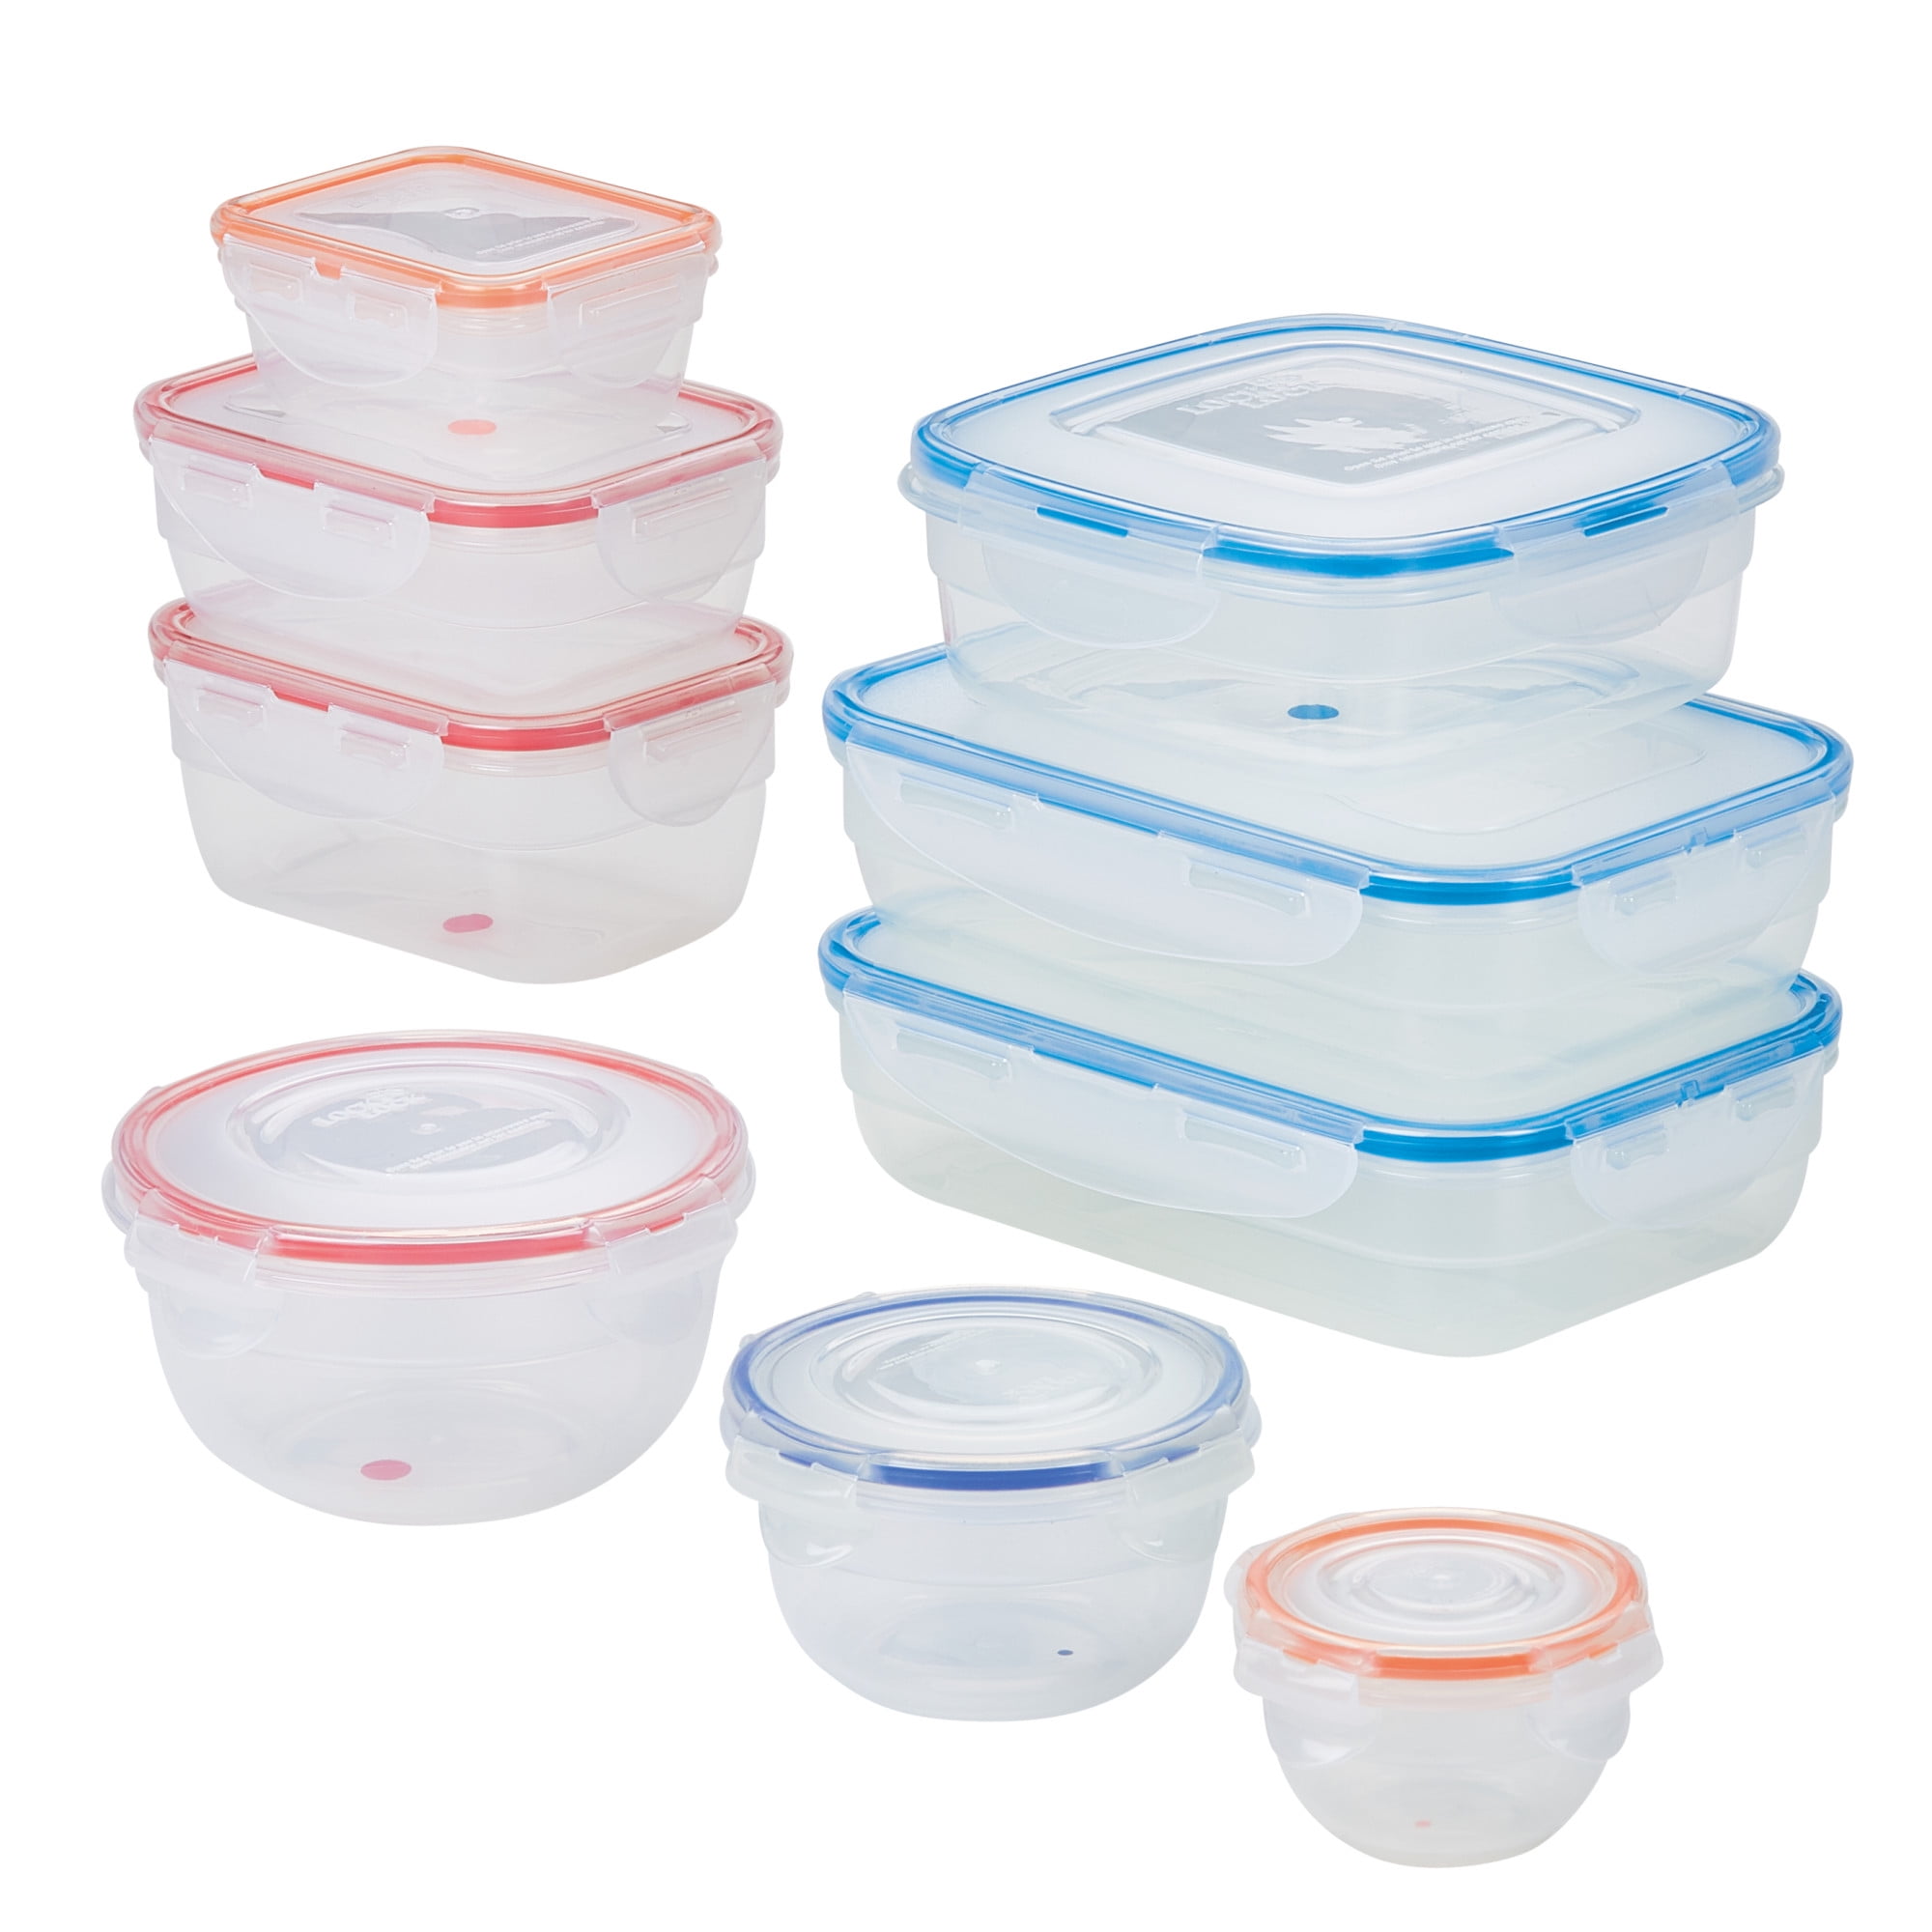 lock & lock food storage containers